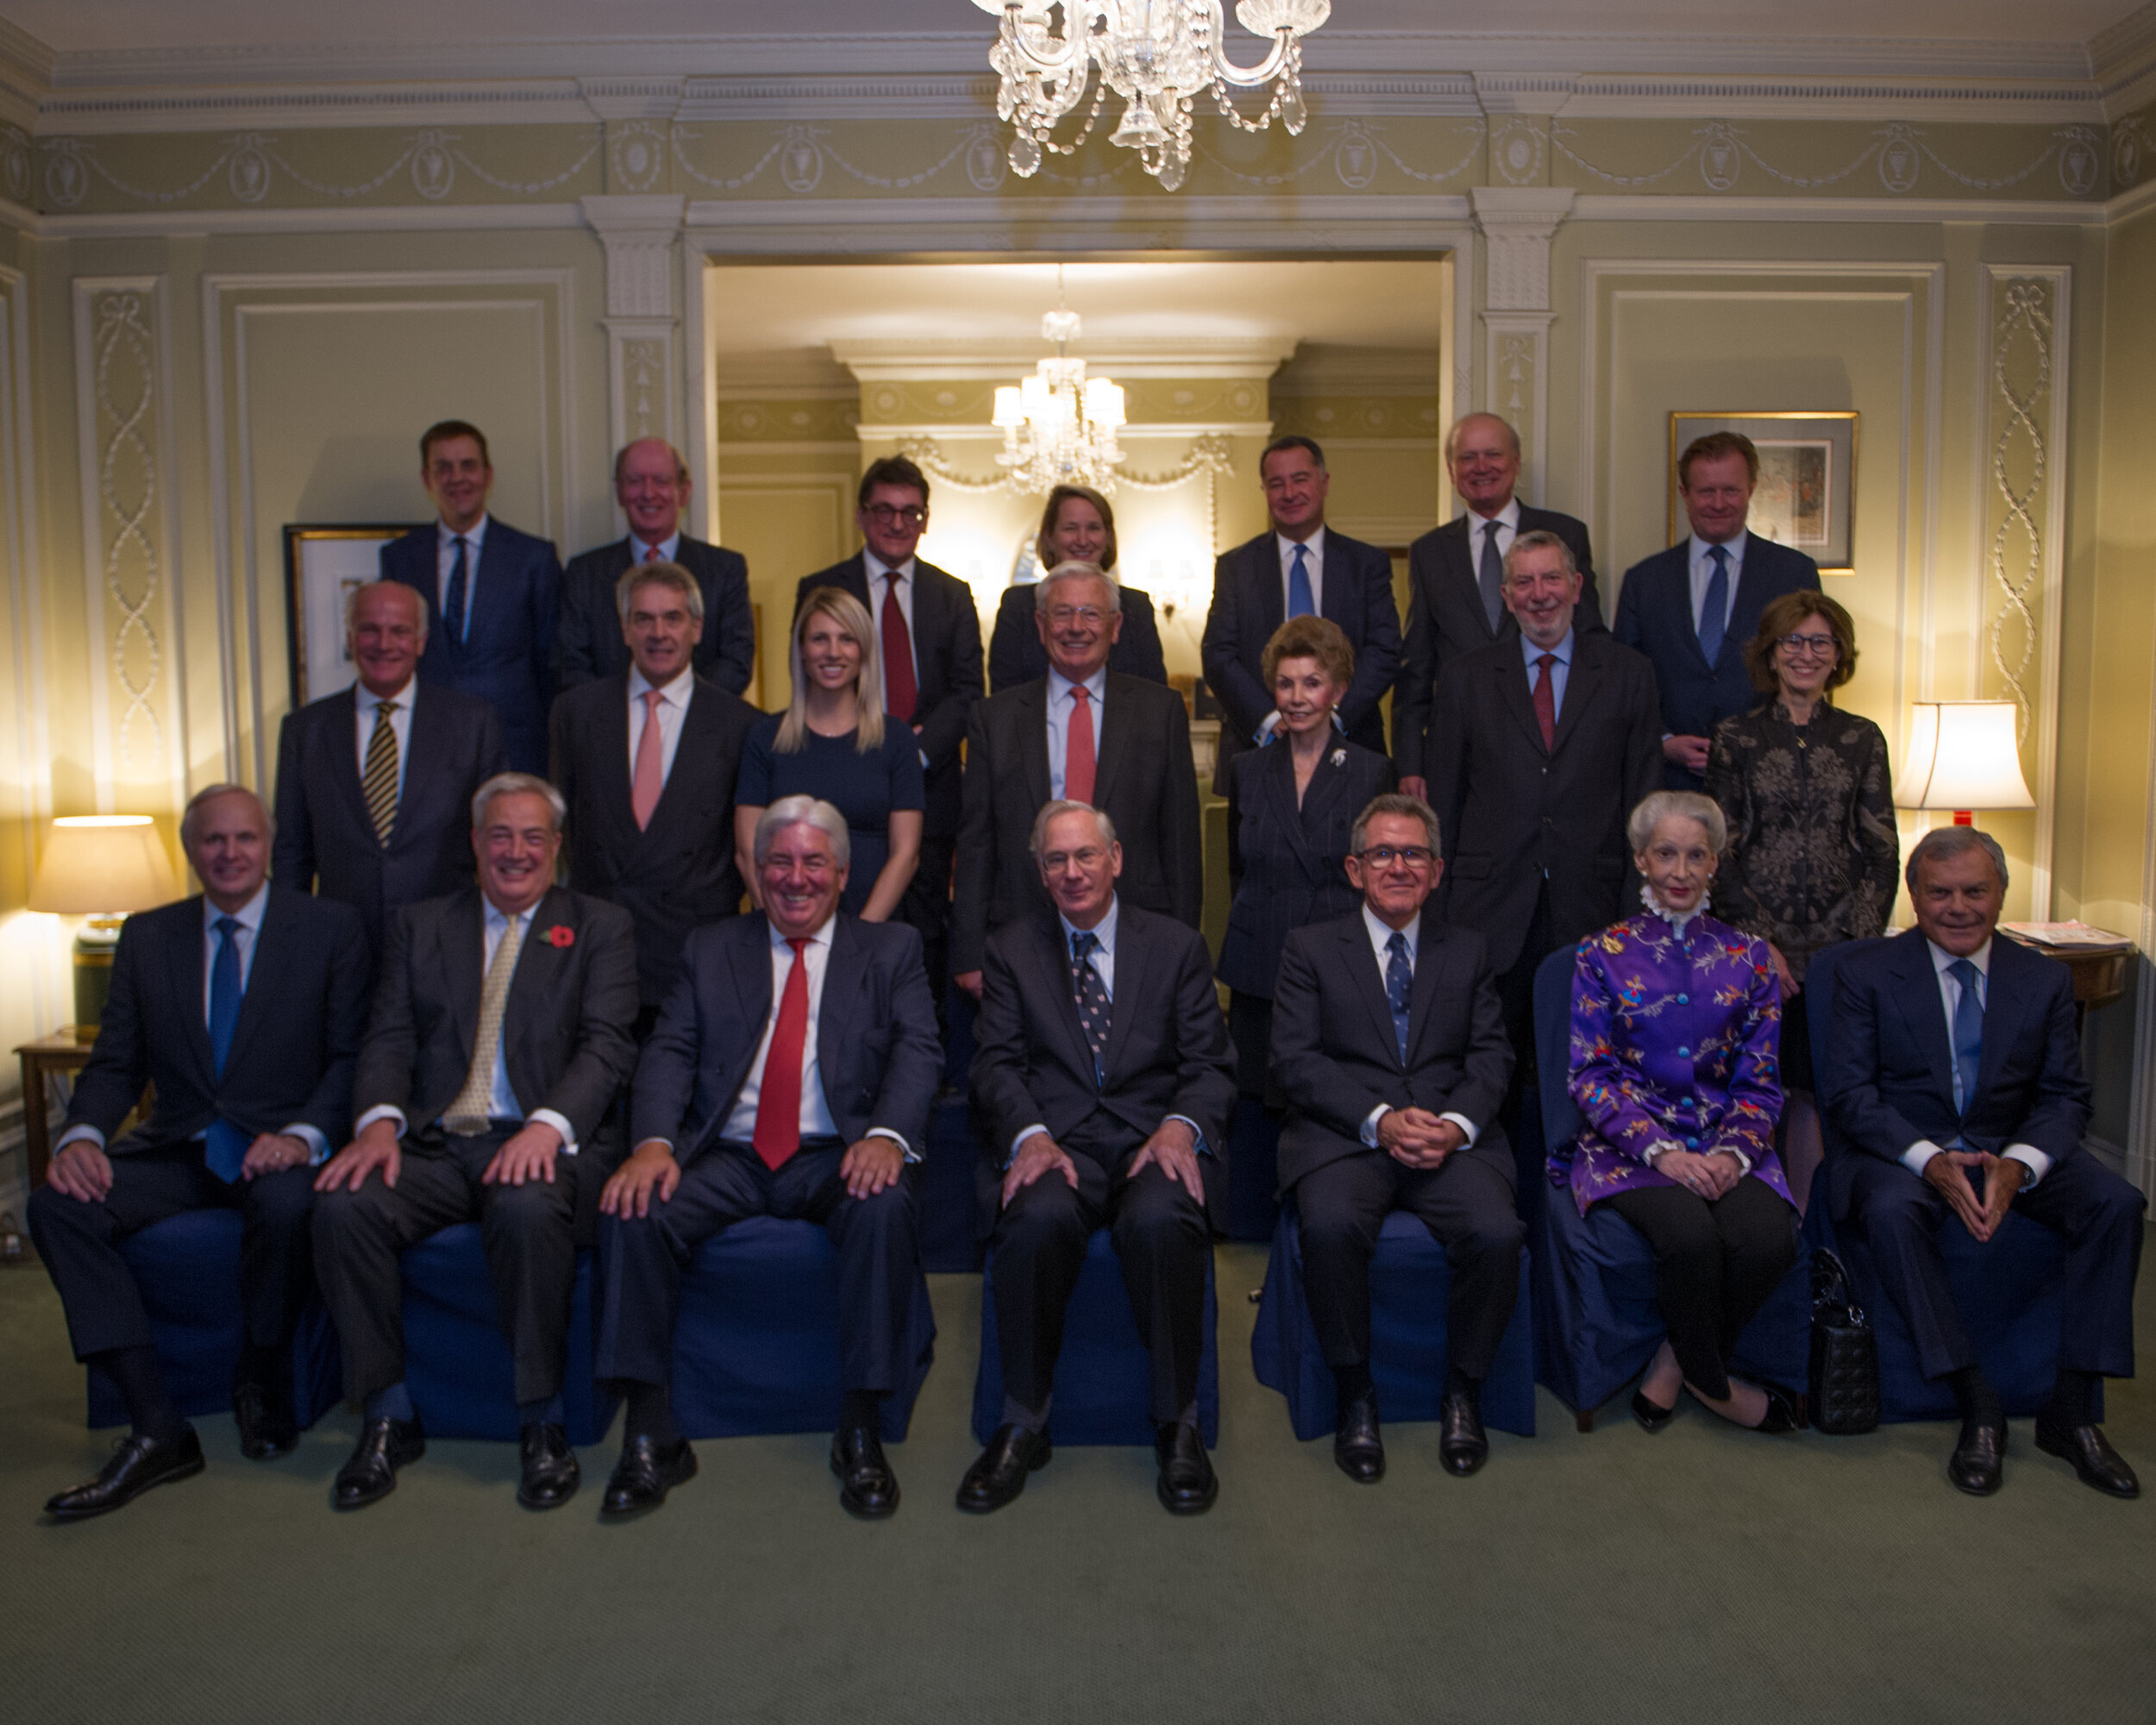  St. George’s Society’s Patron, HRH The Duke of Gloucester KC GCVO, members the Advisory Council and the 250th Anniversary Honorary Committee met during the annual dinner in London. 